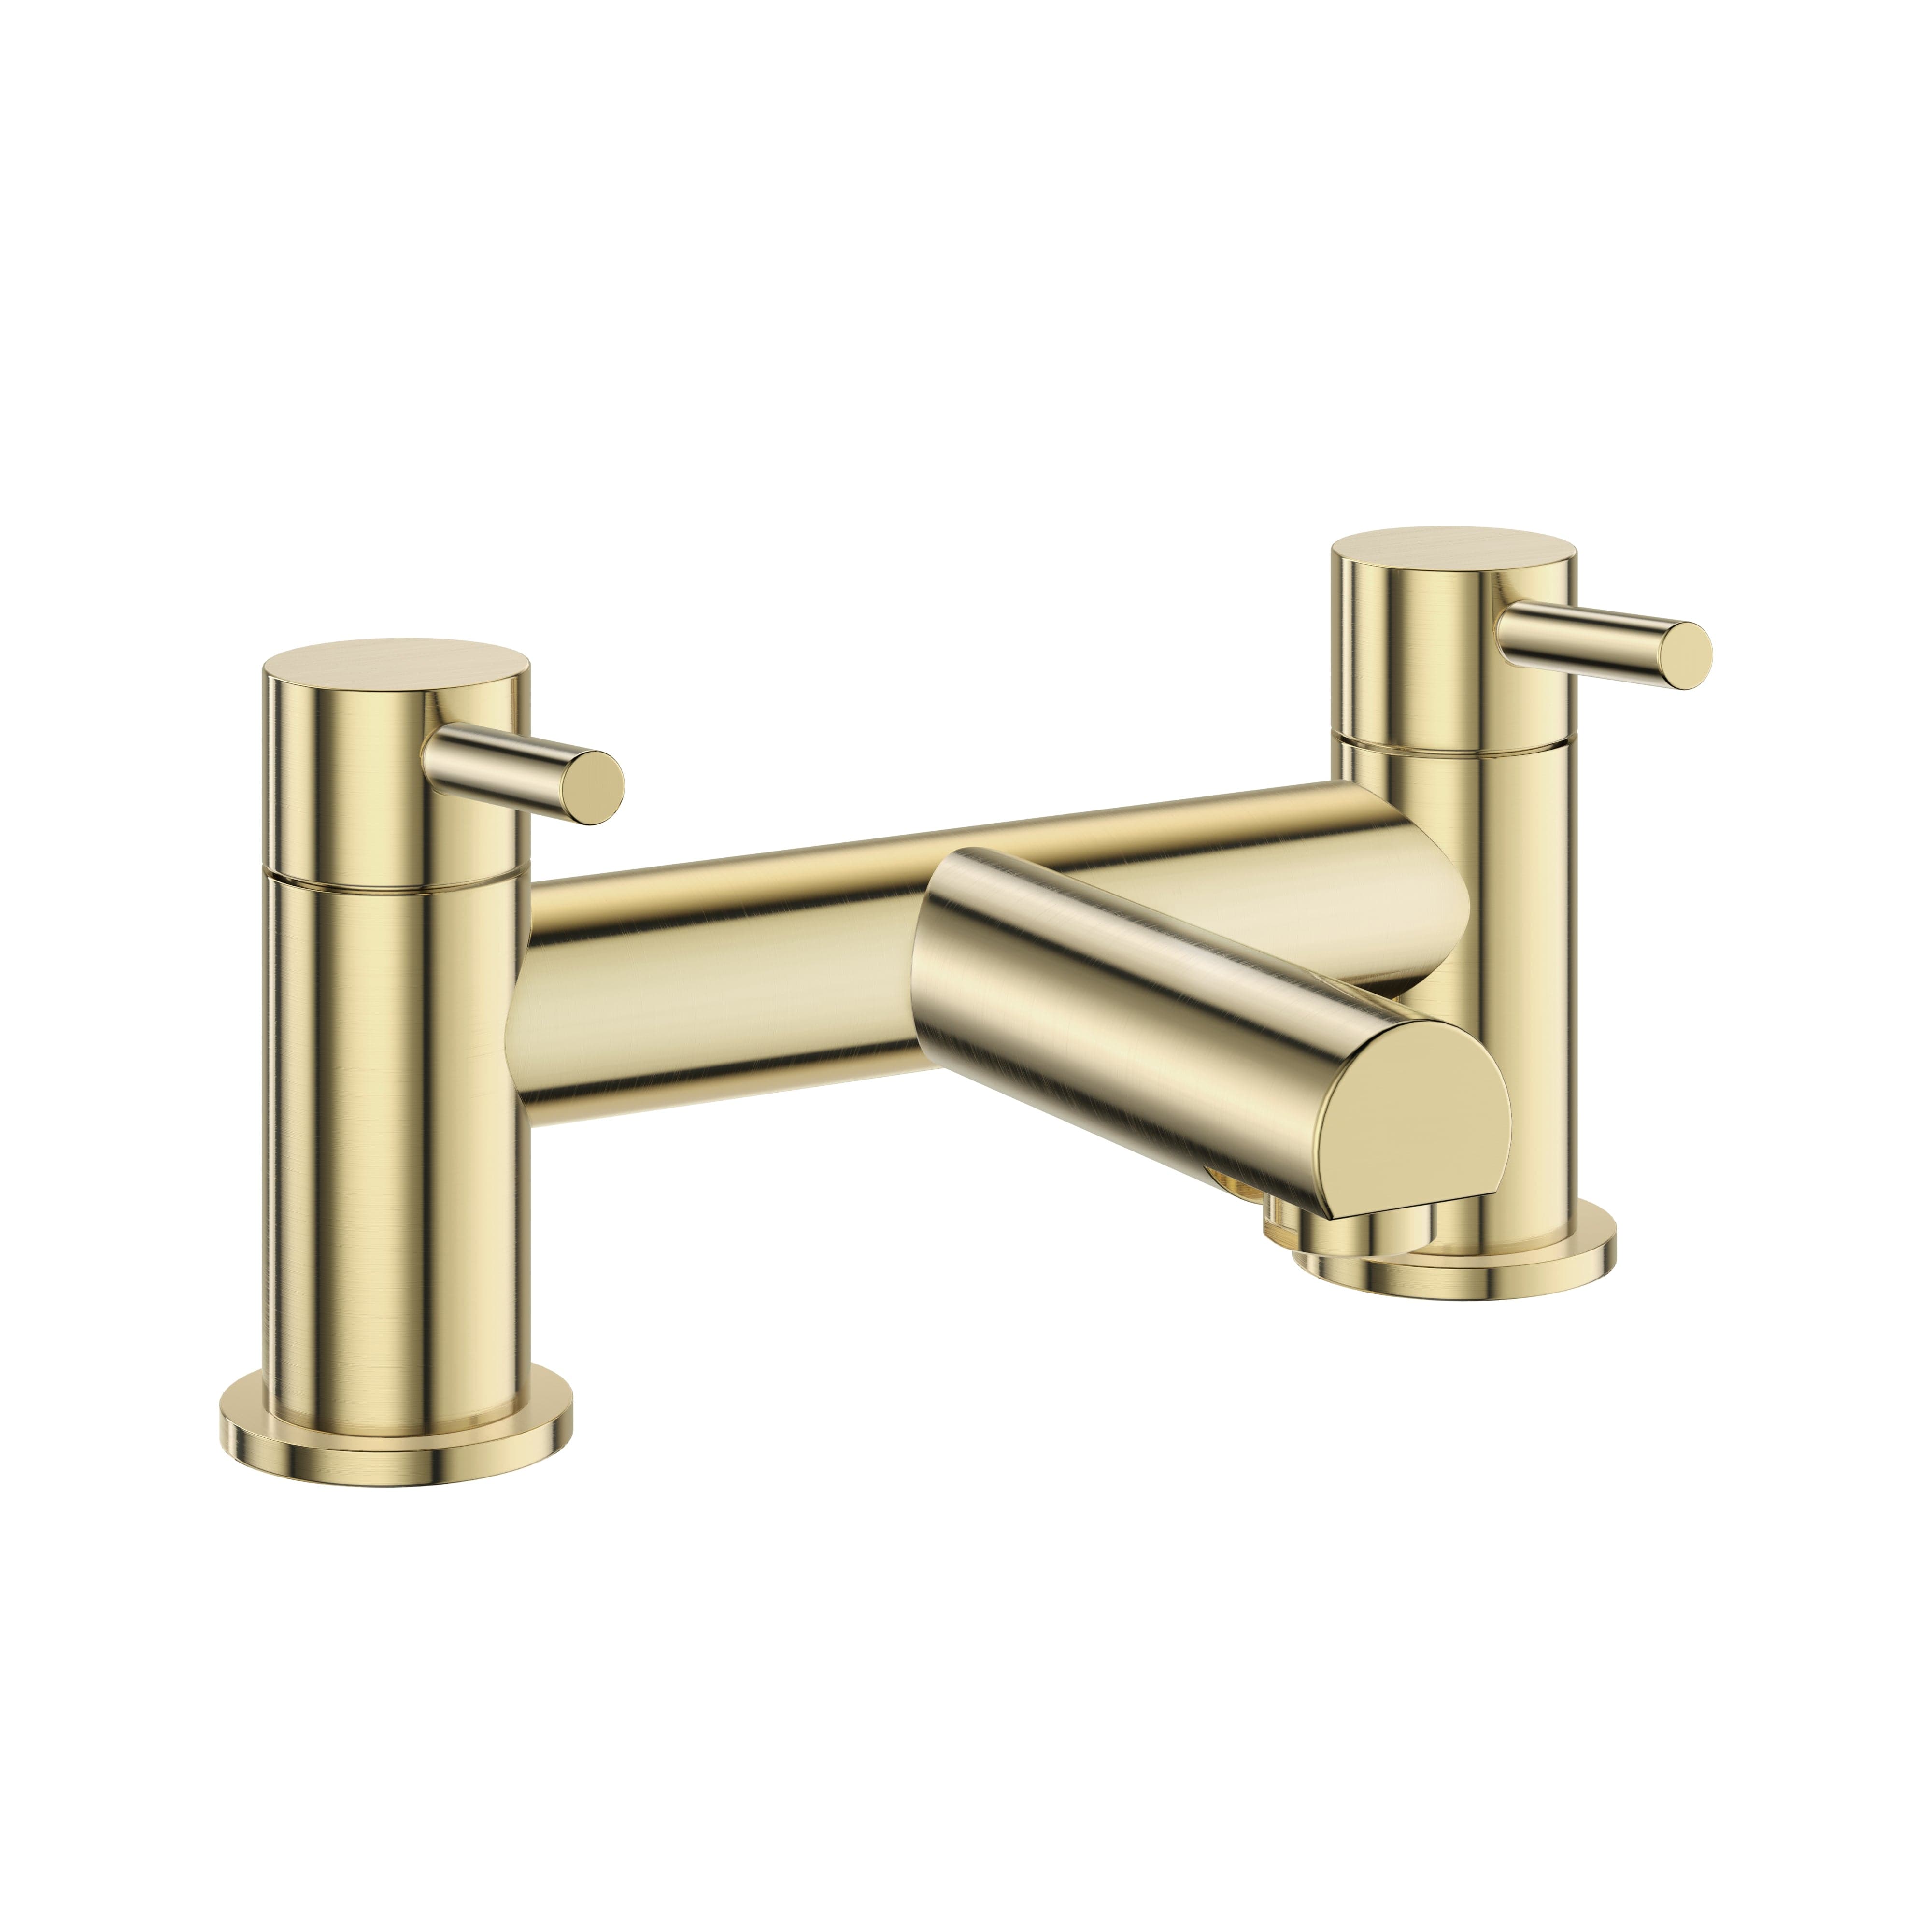 Dixon Round Bath Filler Mixer Tap in Brushed Brass, stylish addition for modern bathrooms. Buy now at Bathroom4Less.